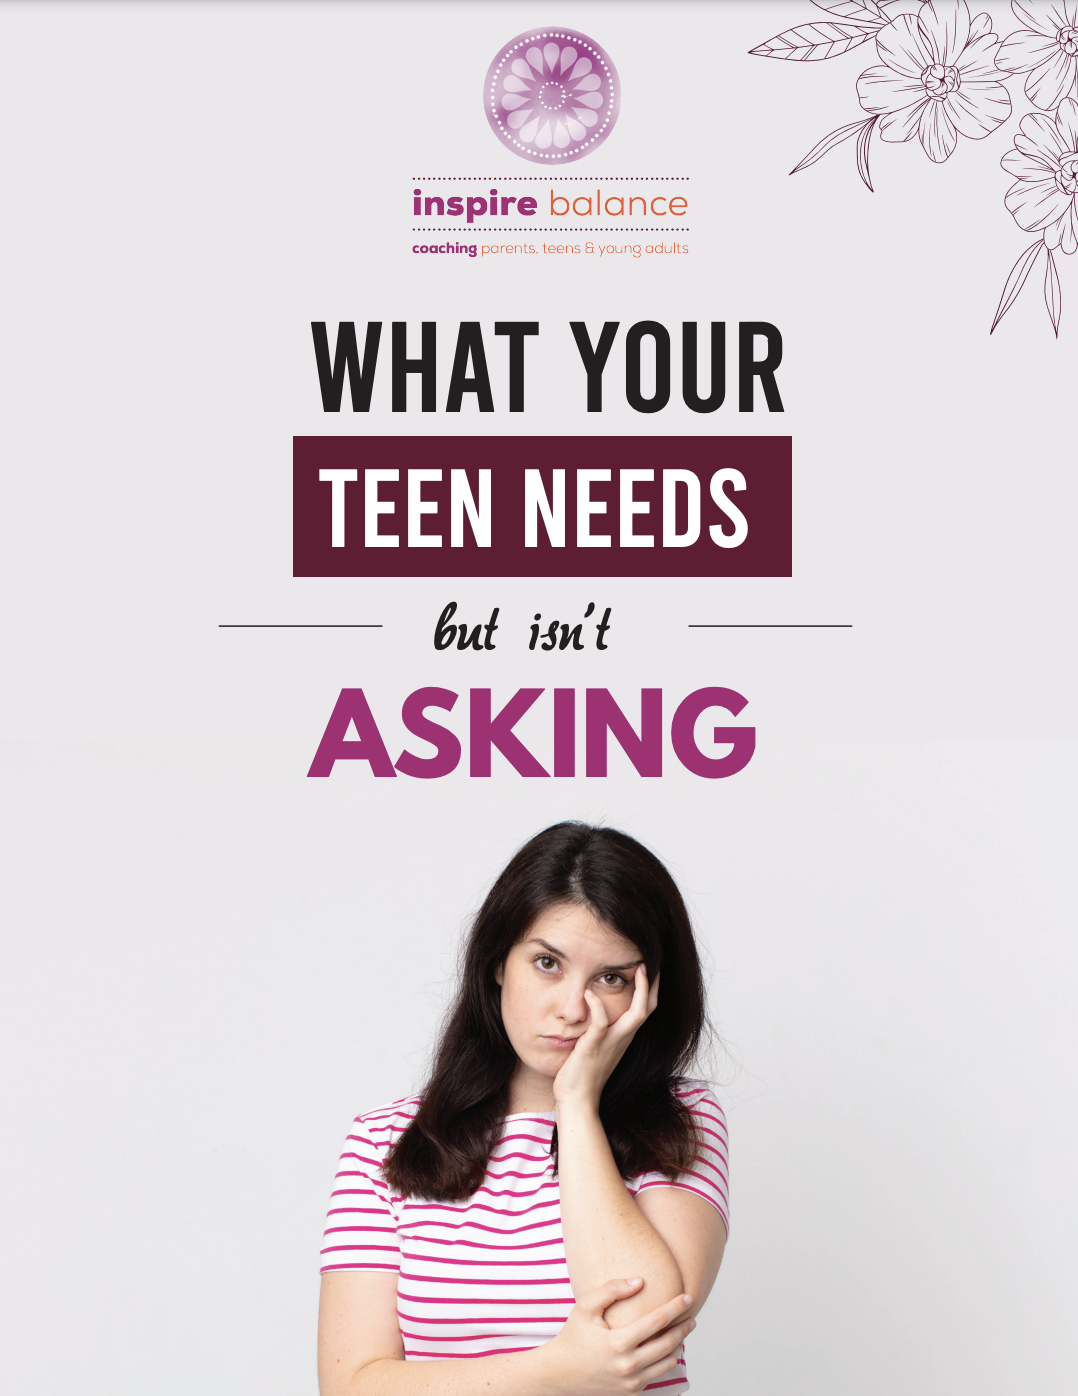 What Your Teen Needs But isn't Asking